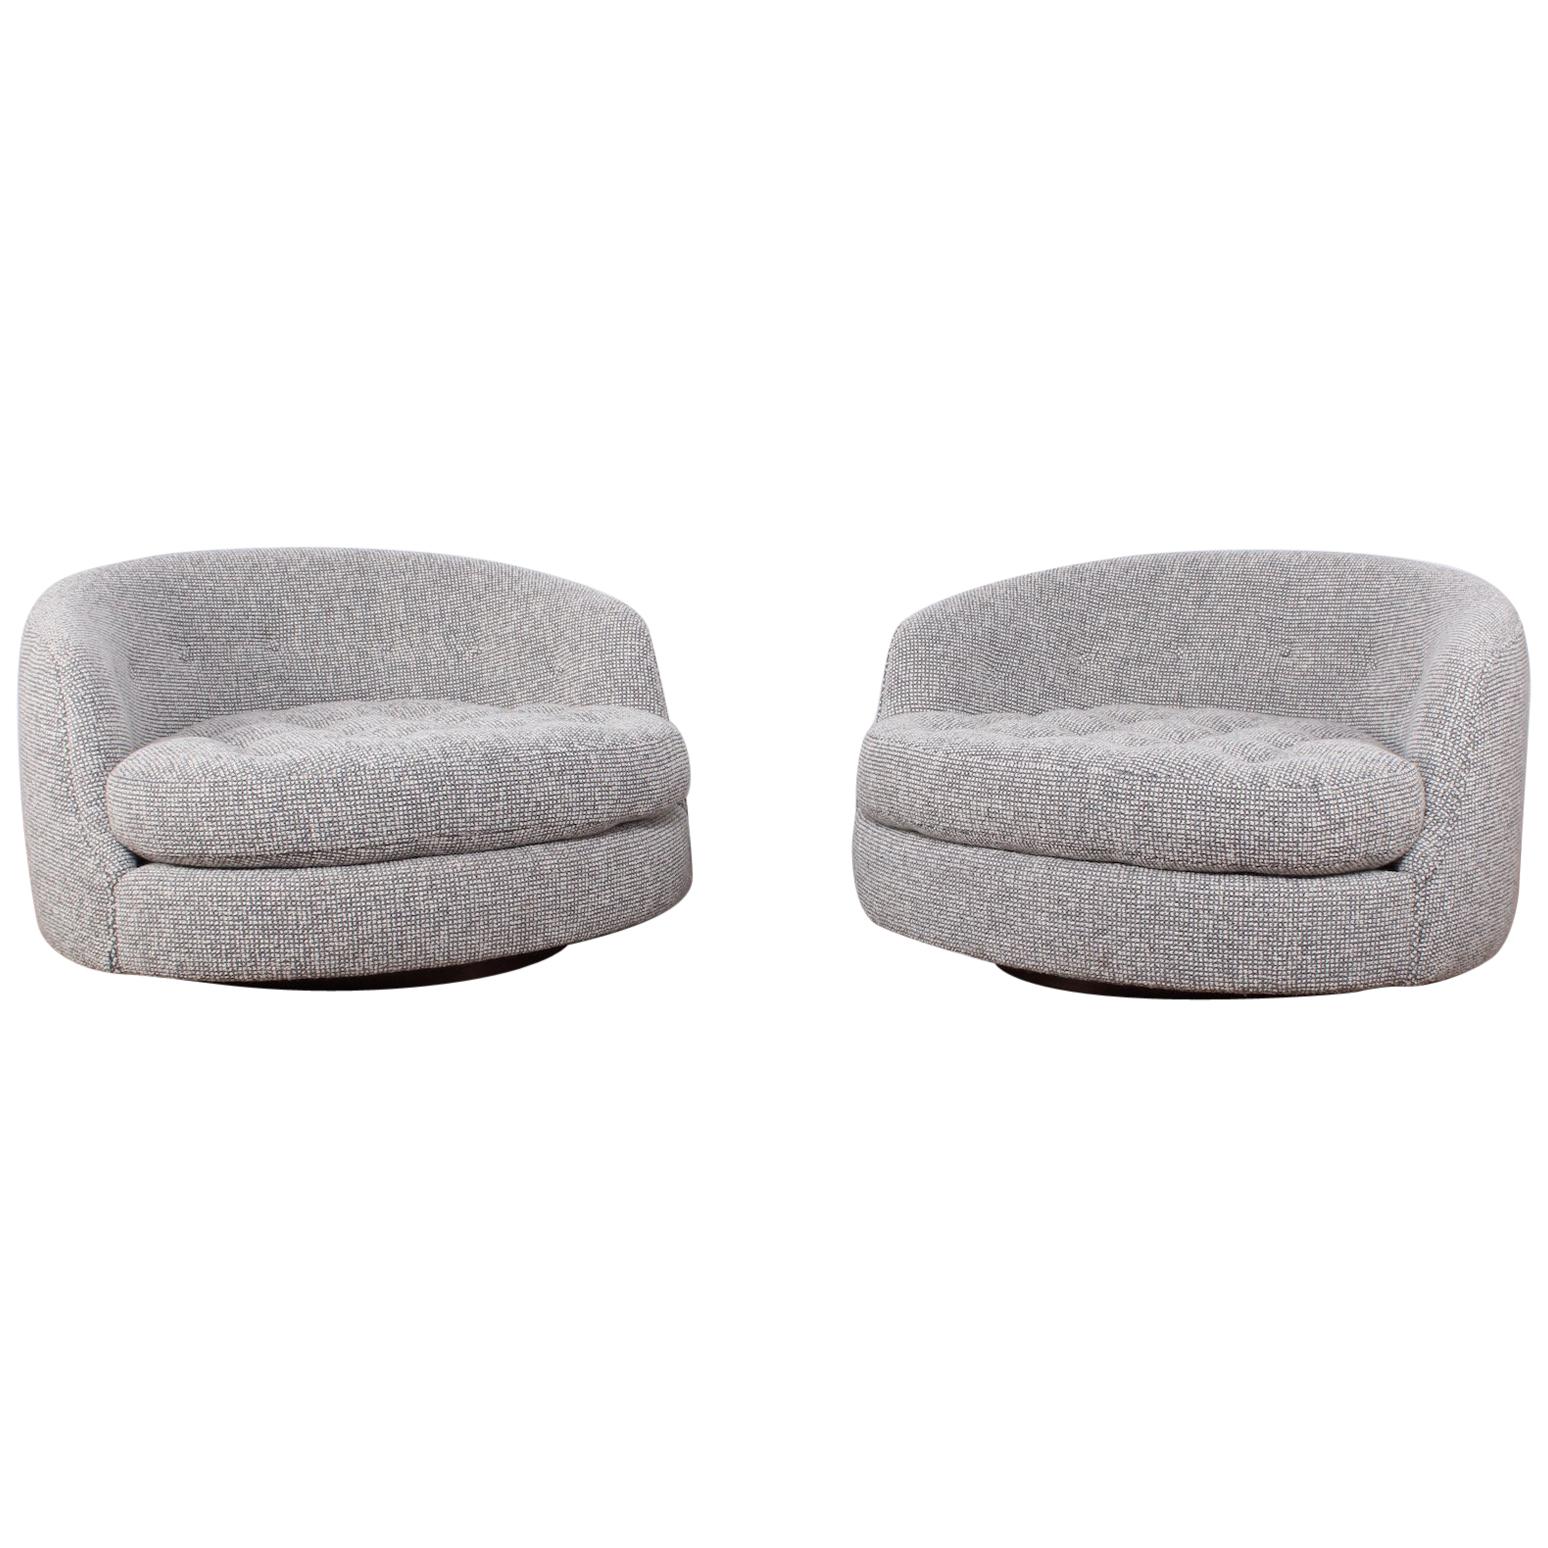 Large Pair of Swivel Chairs Designed by Milo Baughman